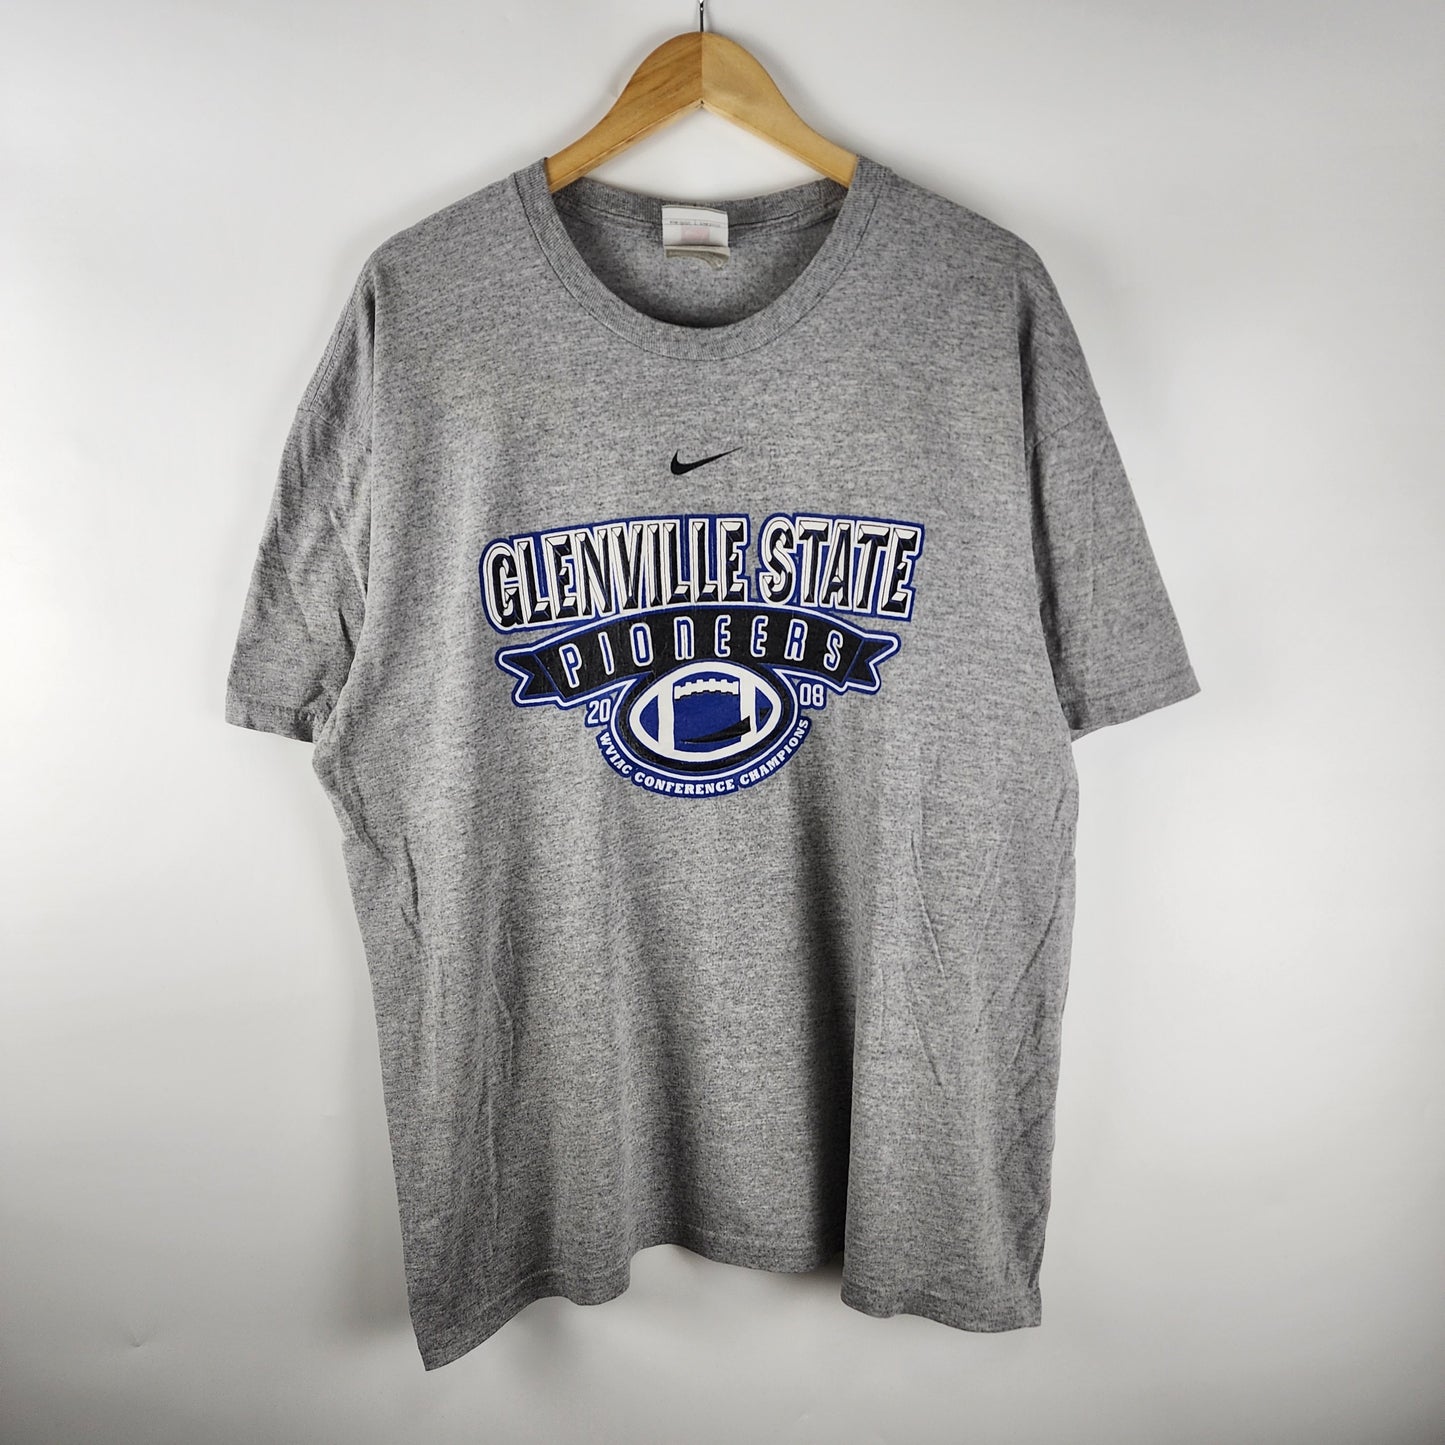 Nike Team 00's x Glenville State University "Pioneers"  T-shirt 